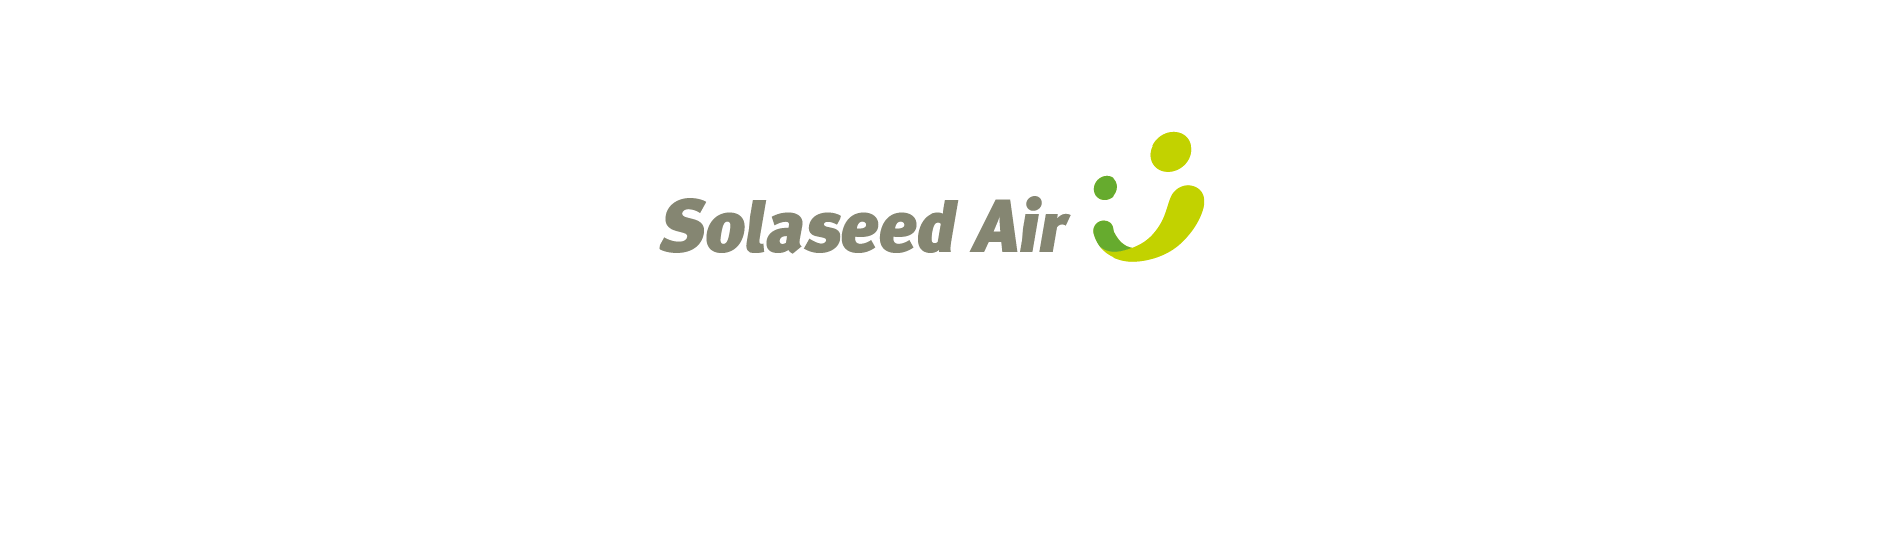 ALM completes sale & leaseback of one B737-800 between Fuyo and Solaseed Air